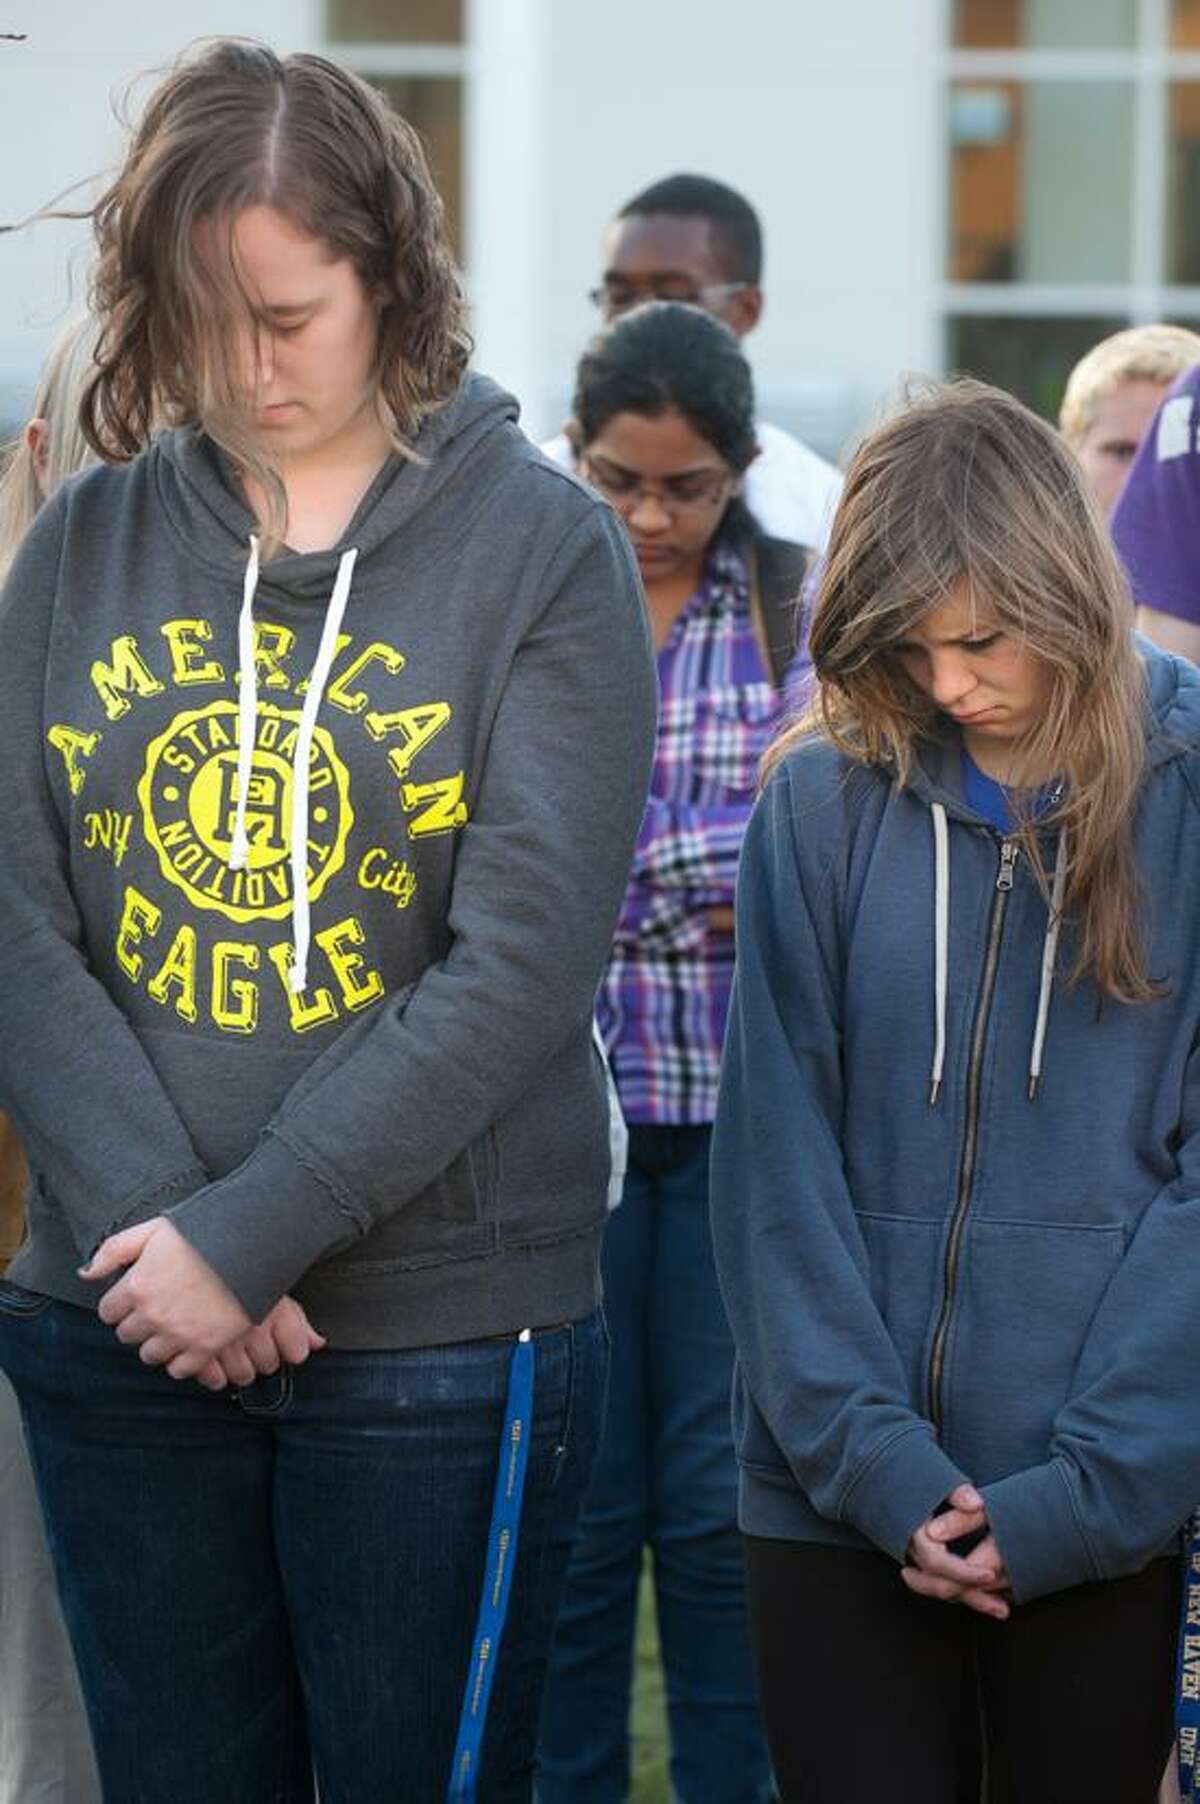 Alaina Kaiser, a sophomore and Marija Savaiko, a freshmen observe a moment of silence during a student vigil at UNH to remember those affected by the events of the Boston Marathon explosions April 17, 2013. vm Williams